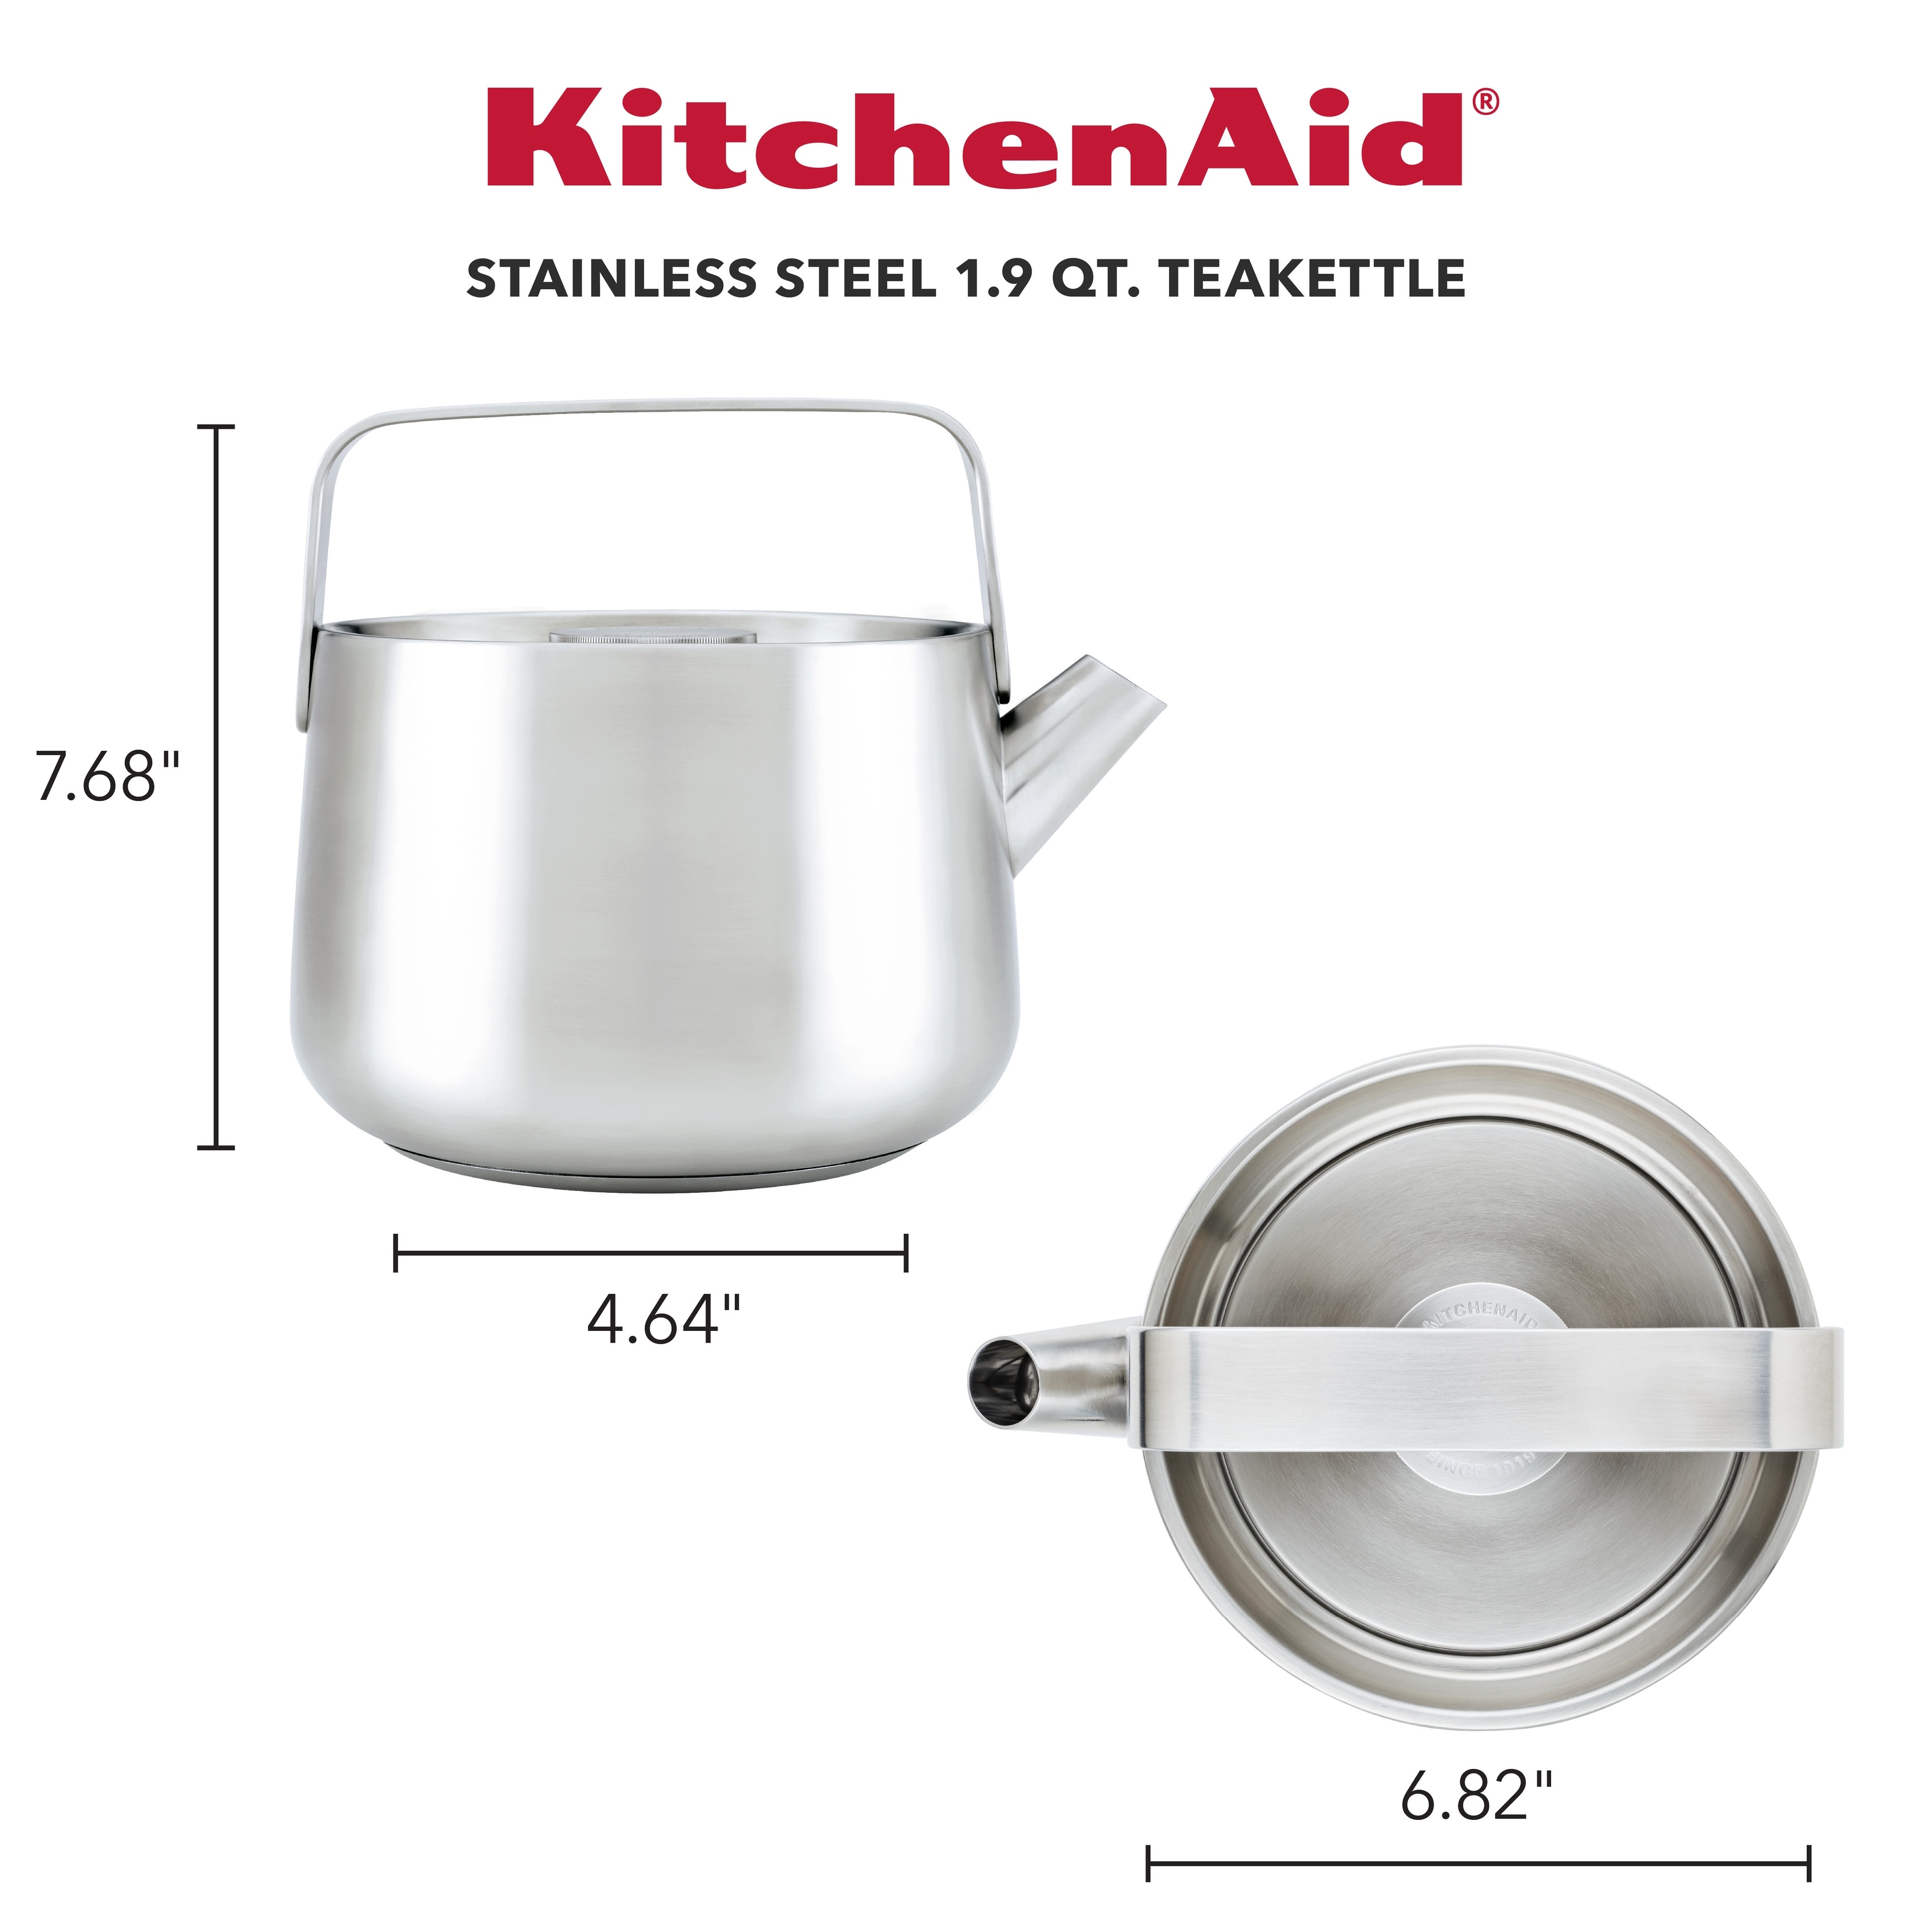 https://ak1.ostkcdn.com/images/products/is/images/direct/bc5cd1b54ded8767963b58f0fffdf114c4d934a8/KitchenAid-Stainless-Steel-Whistling-Induction-Teakettle%2C-1.9-Quart%2C-Brushed-Stainless-Steel.jpg